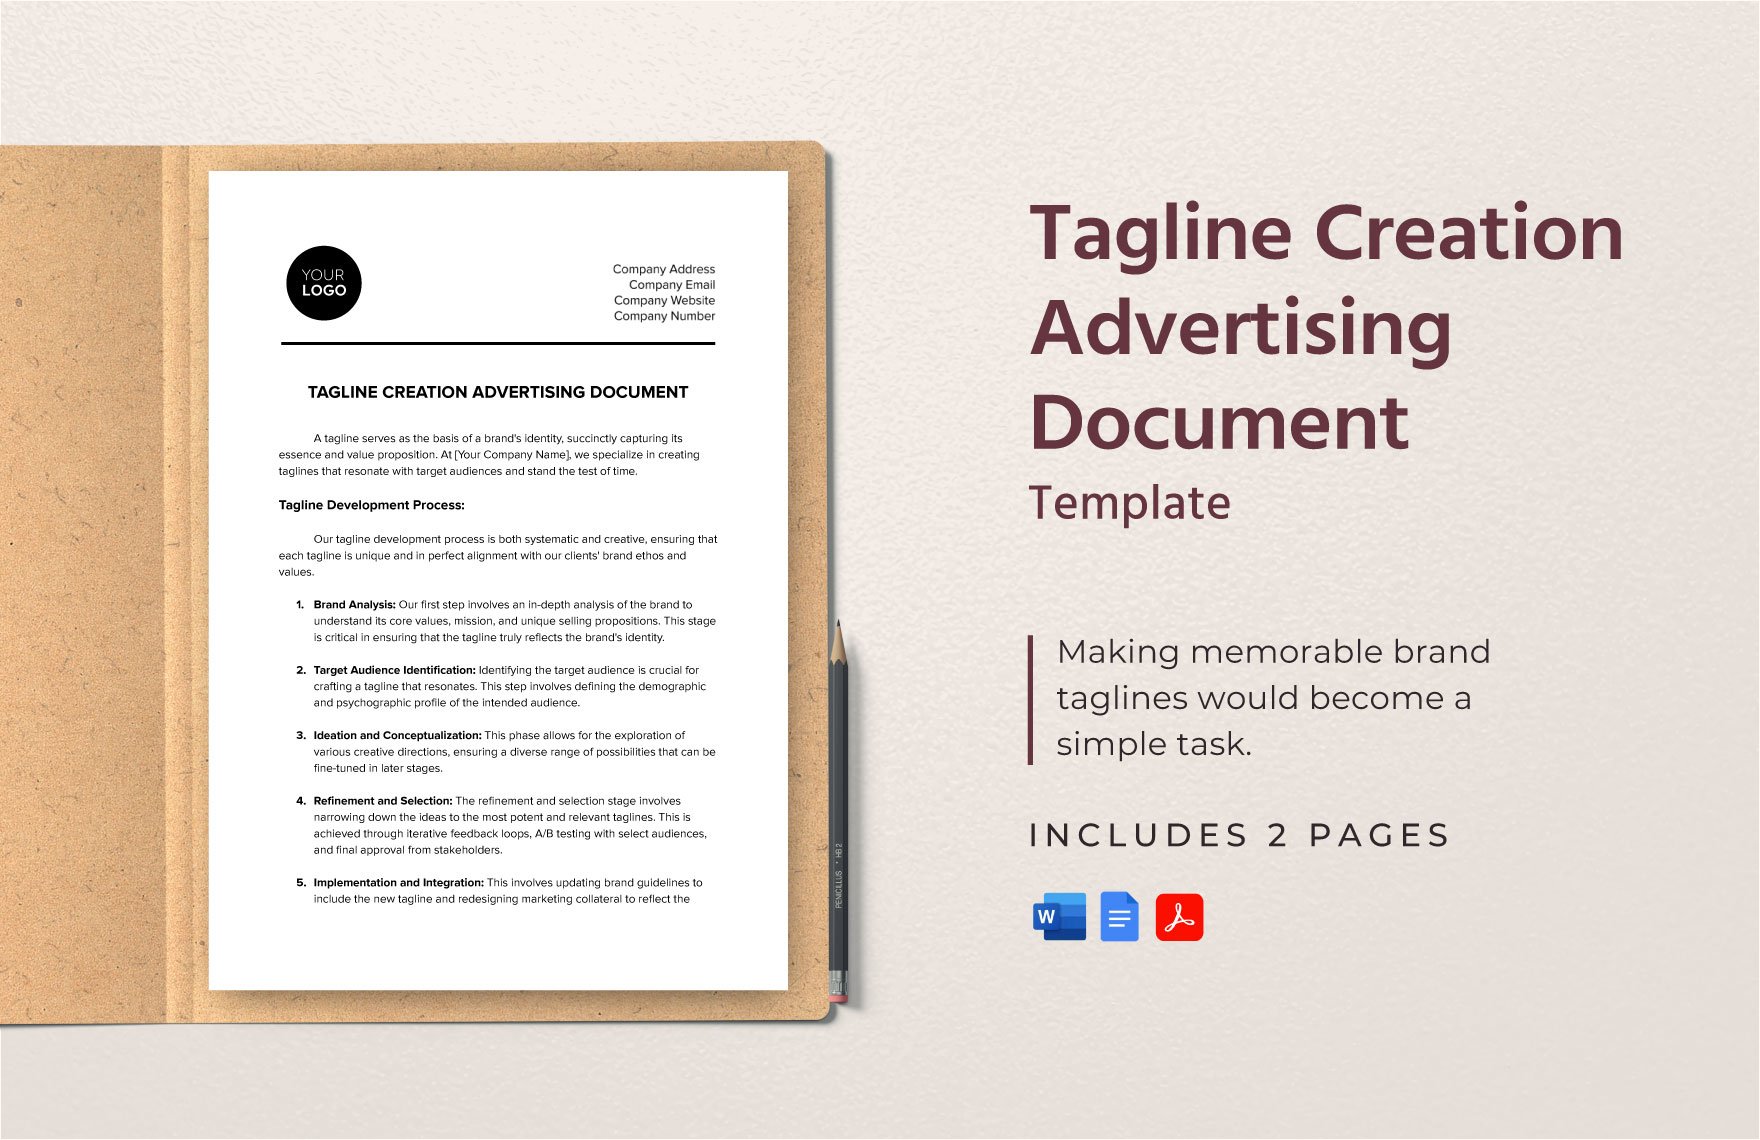 Tagline Creation Advertising Document Template